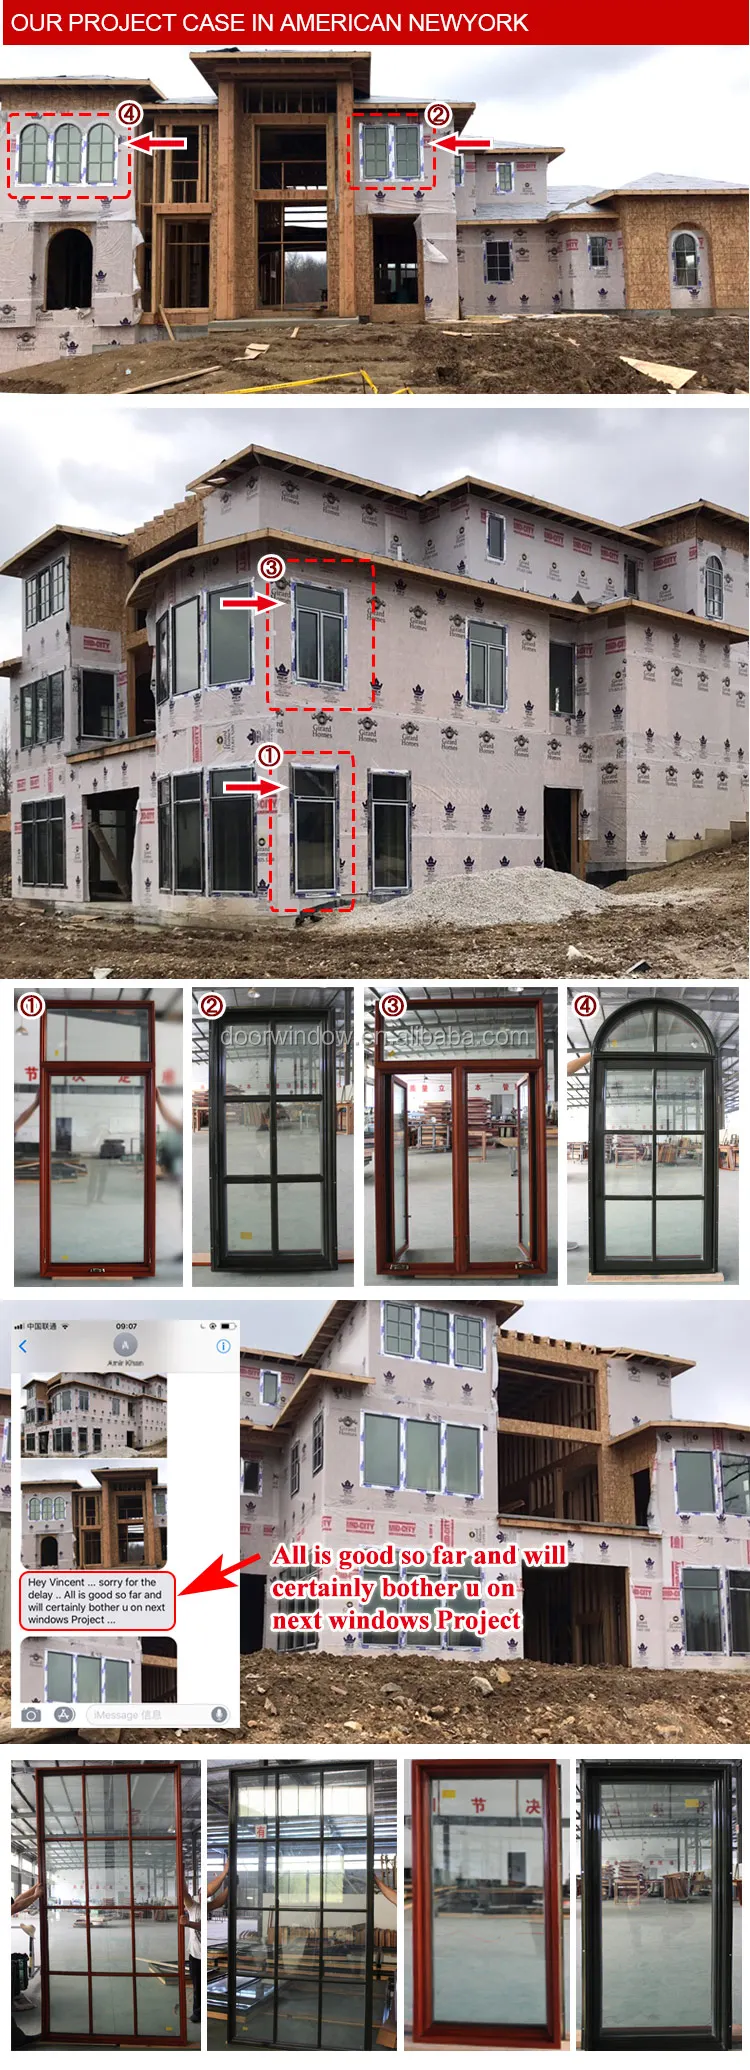 Sound insulation 6 glass panels foldable crank handle casement window with 2 glass panels arched top design window